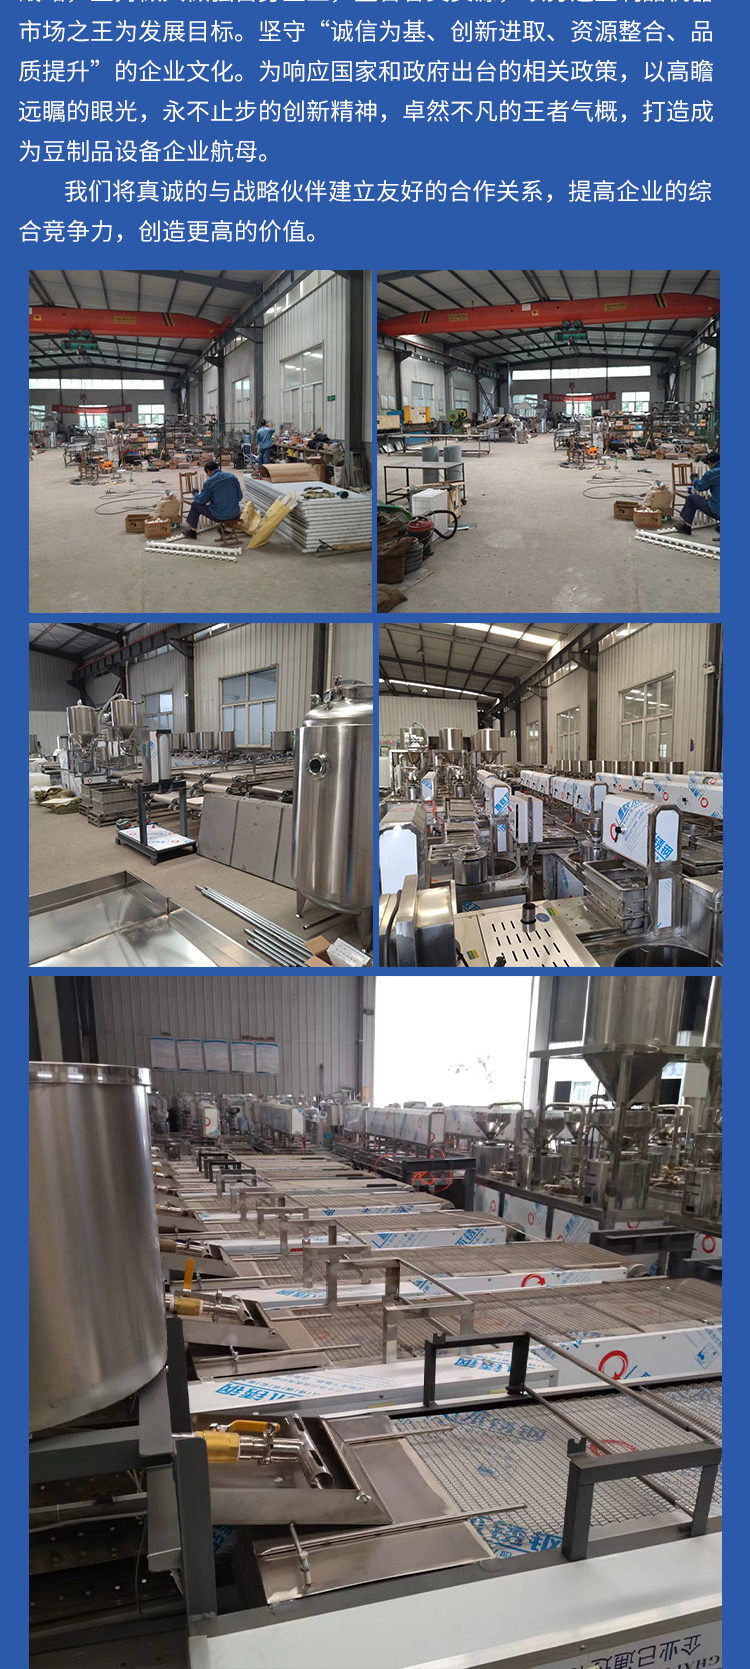 Large intelligent bean sprout machine, multifunctional commercial mung bean sprout production equipment, fully automatic bean product machinery